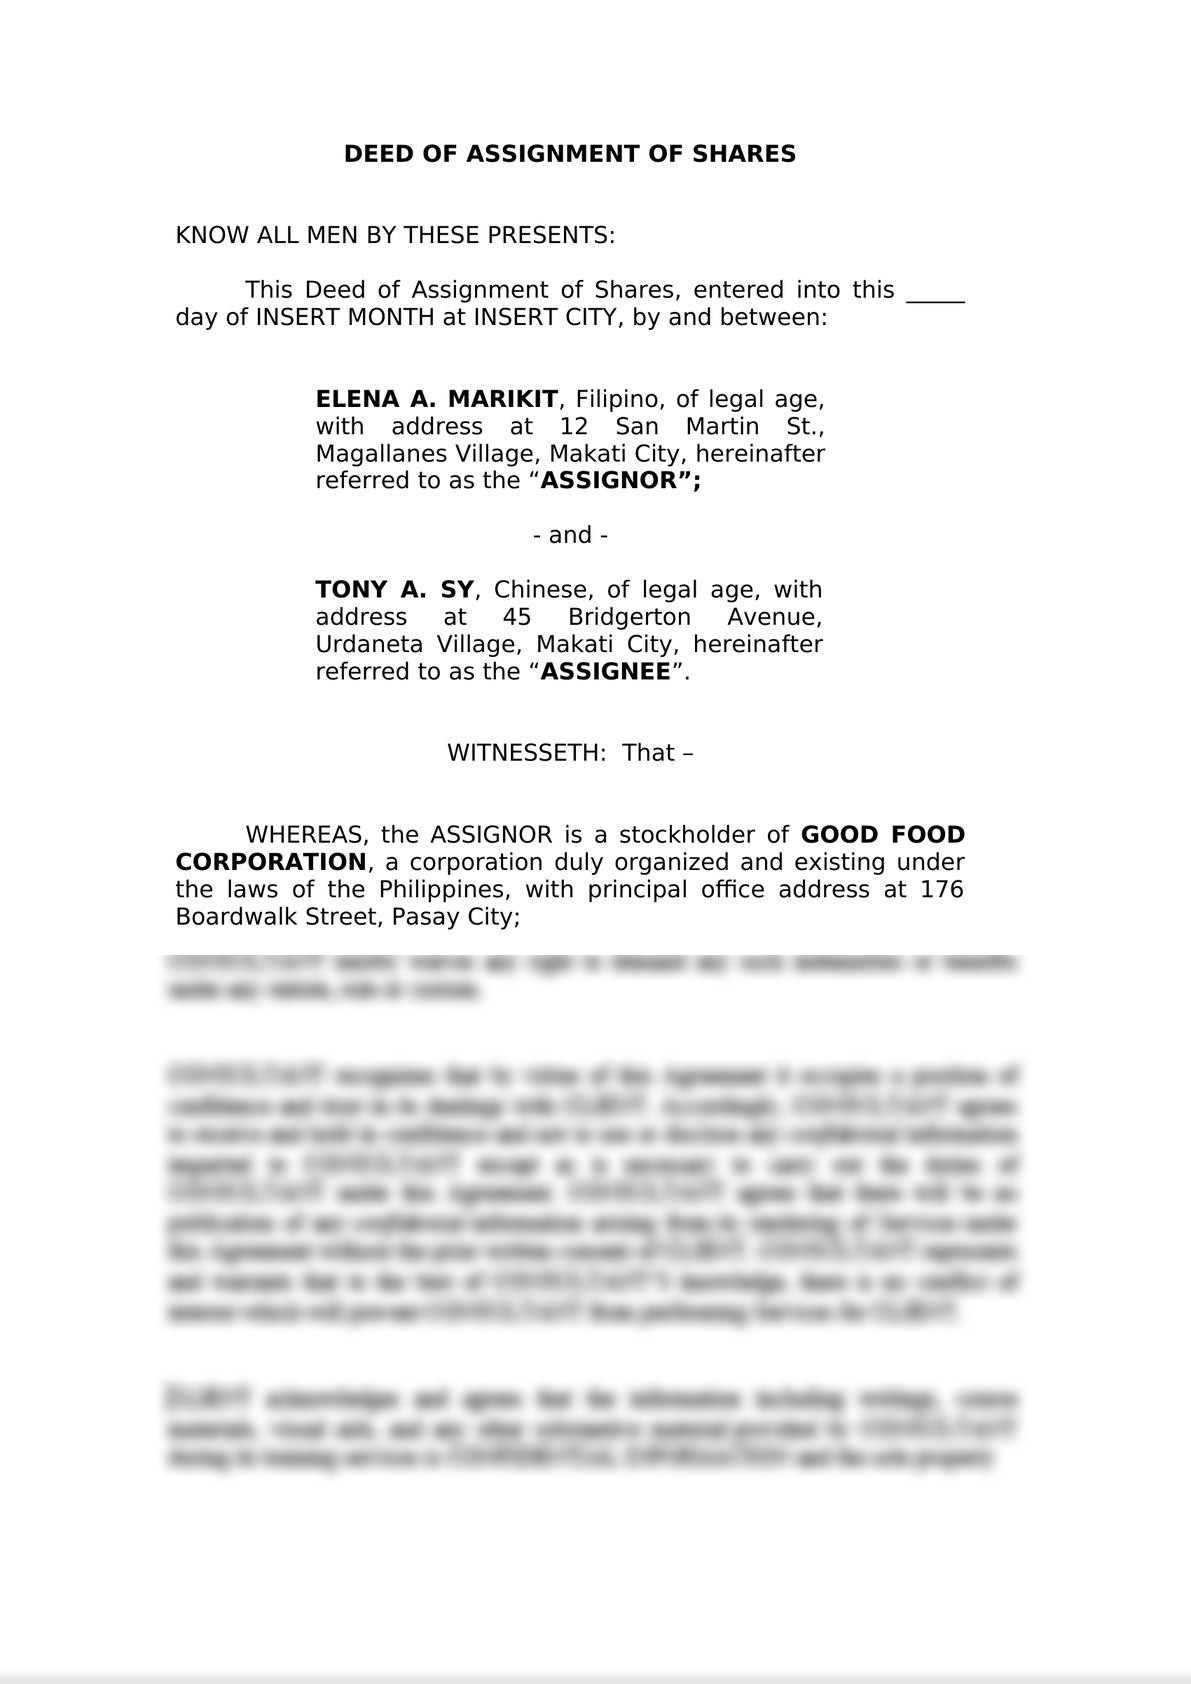 deed of assignment of shares of stocks philippines